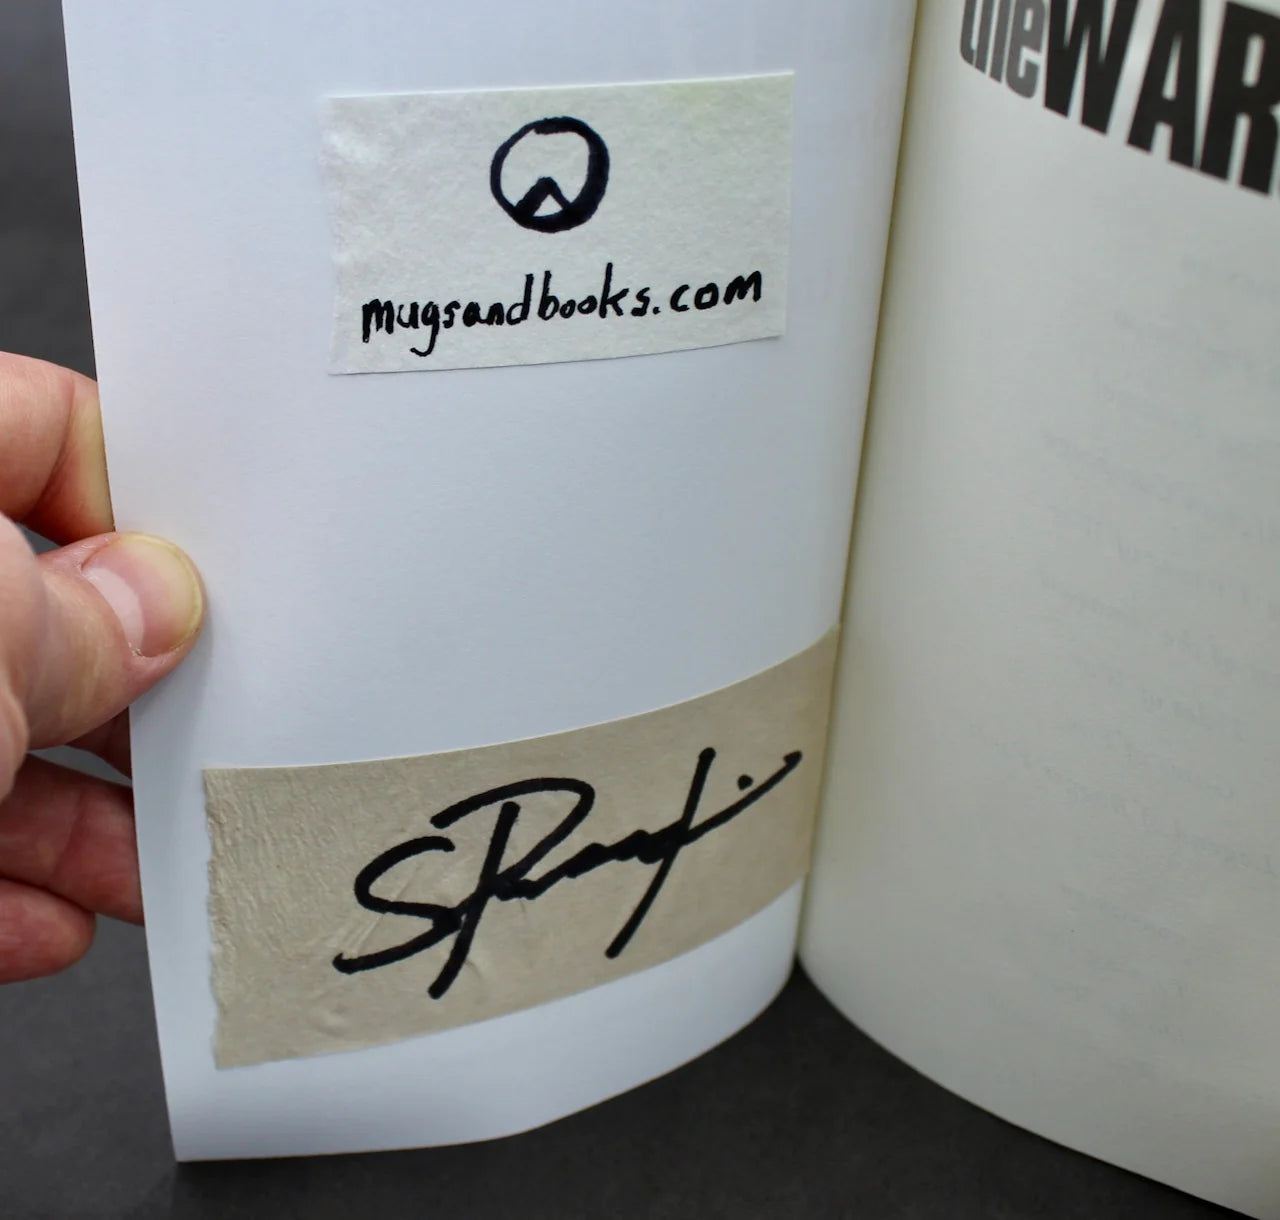 One Bullet Flower Mug and Autographed Book, "The War of Art" by Steven Pressfield (SK7799)